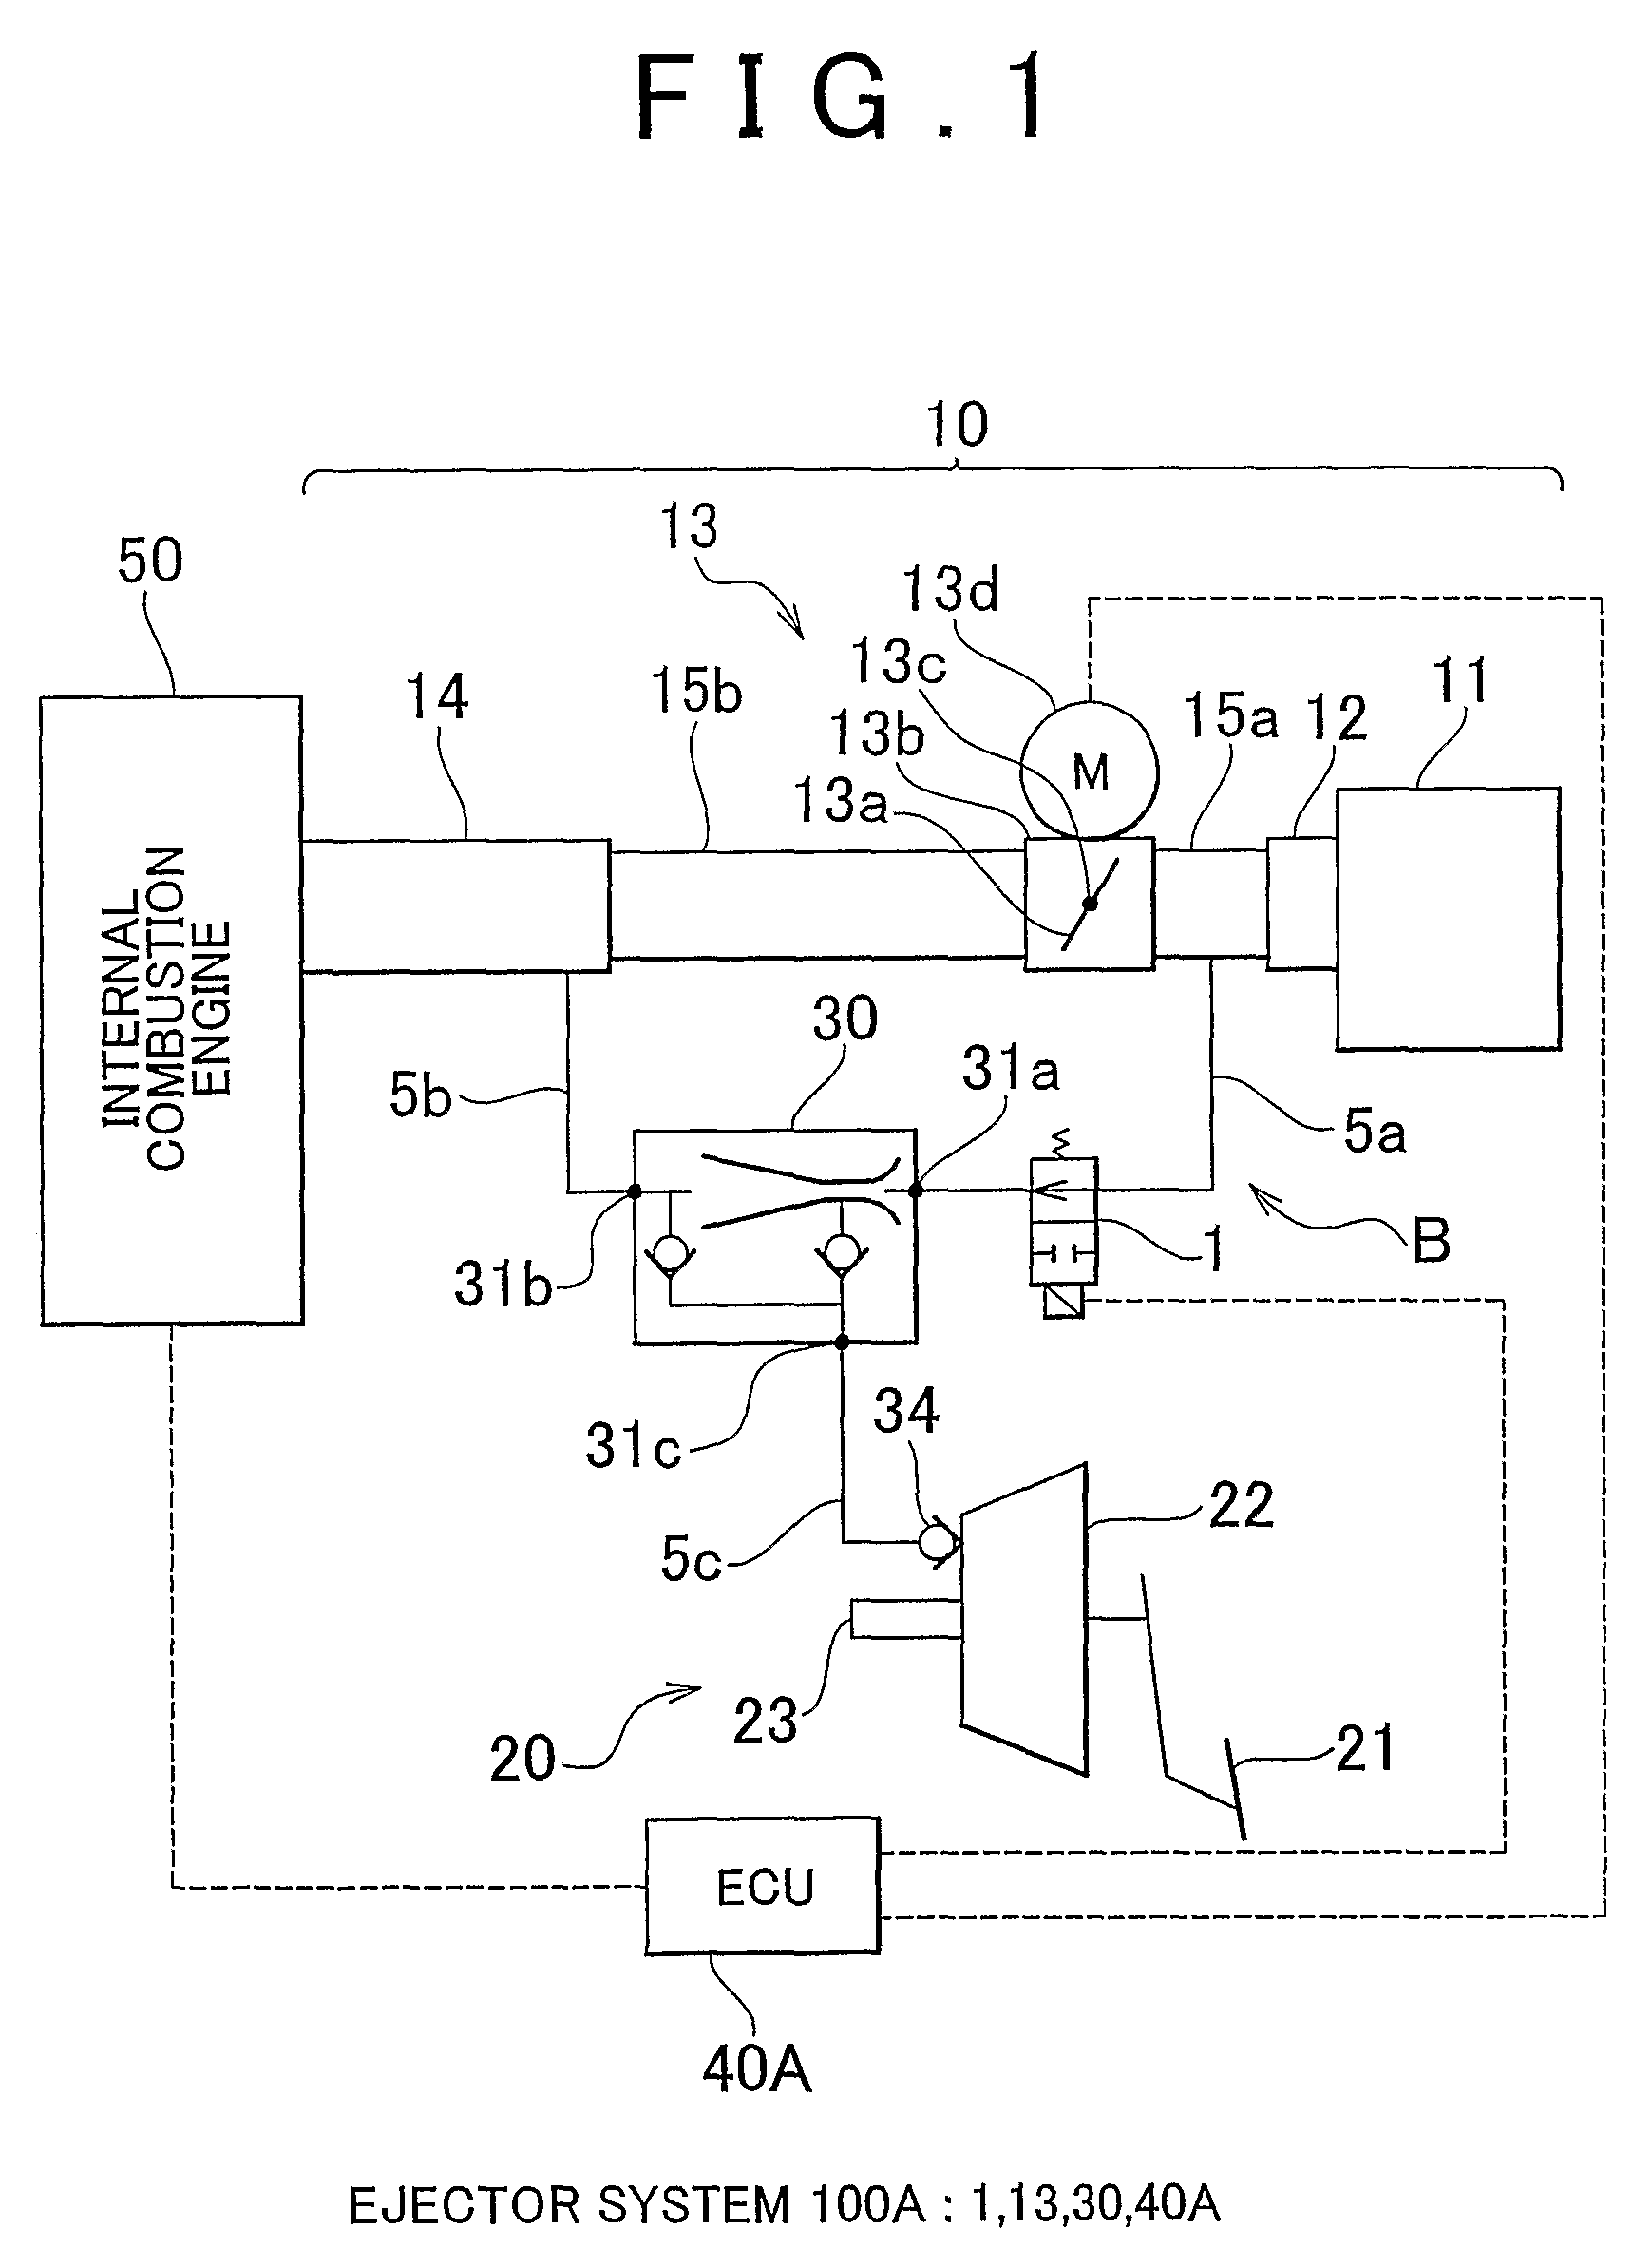 Ejector system for a vehicle and ejector system controller